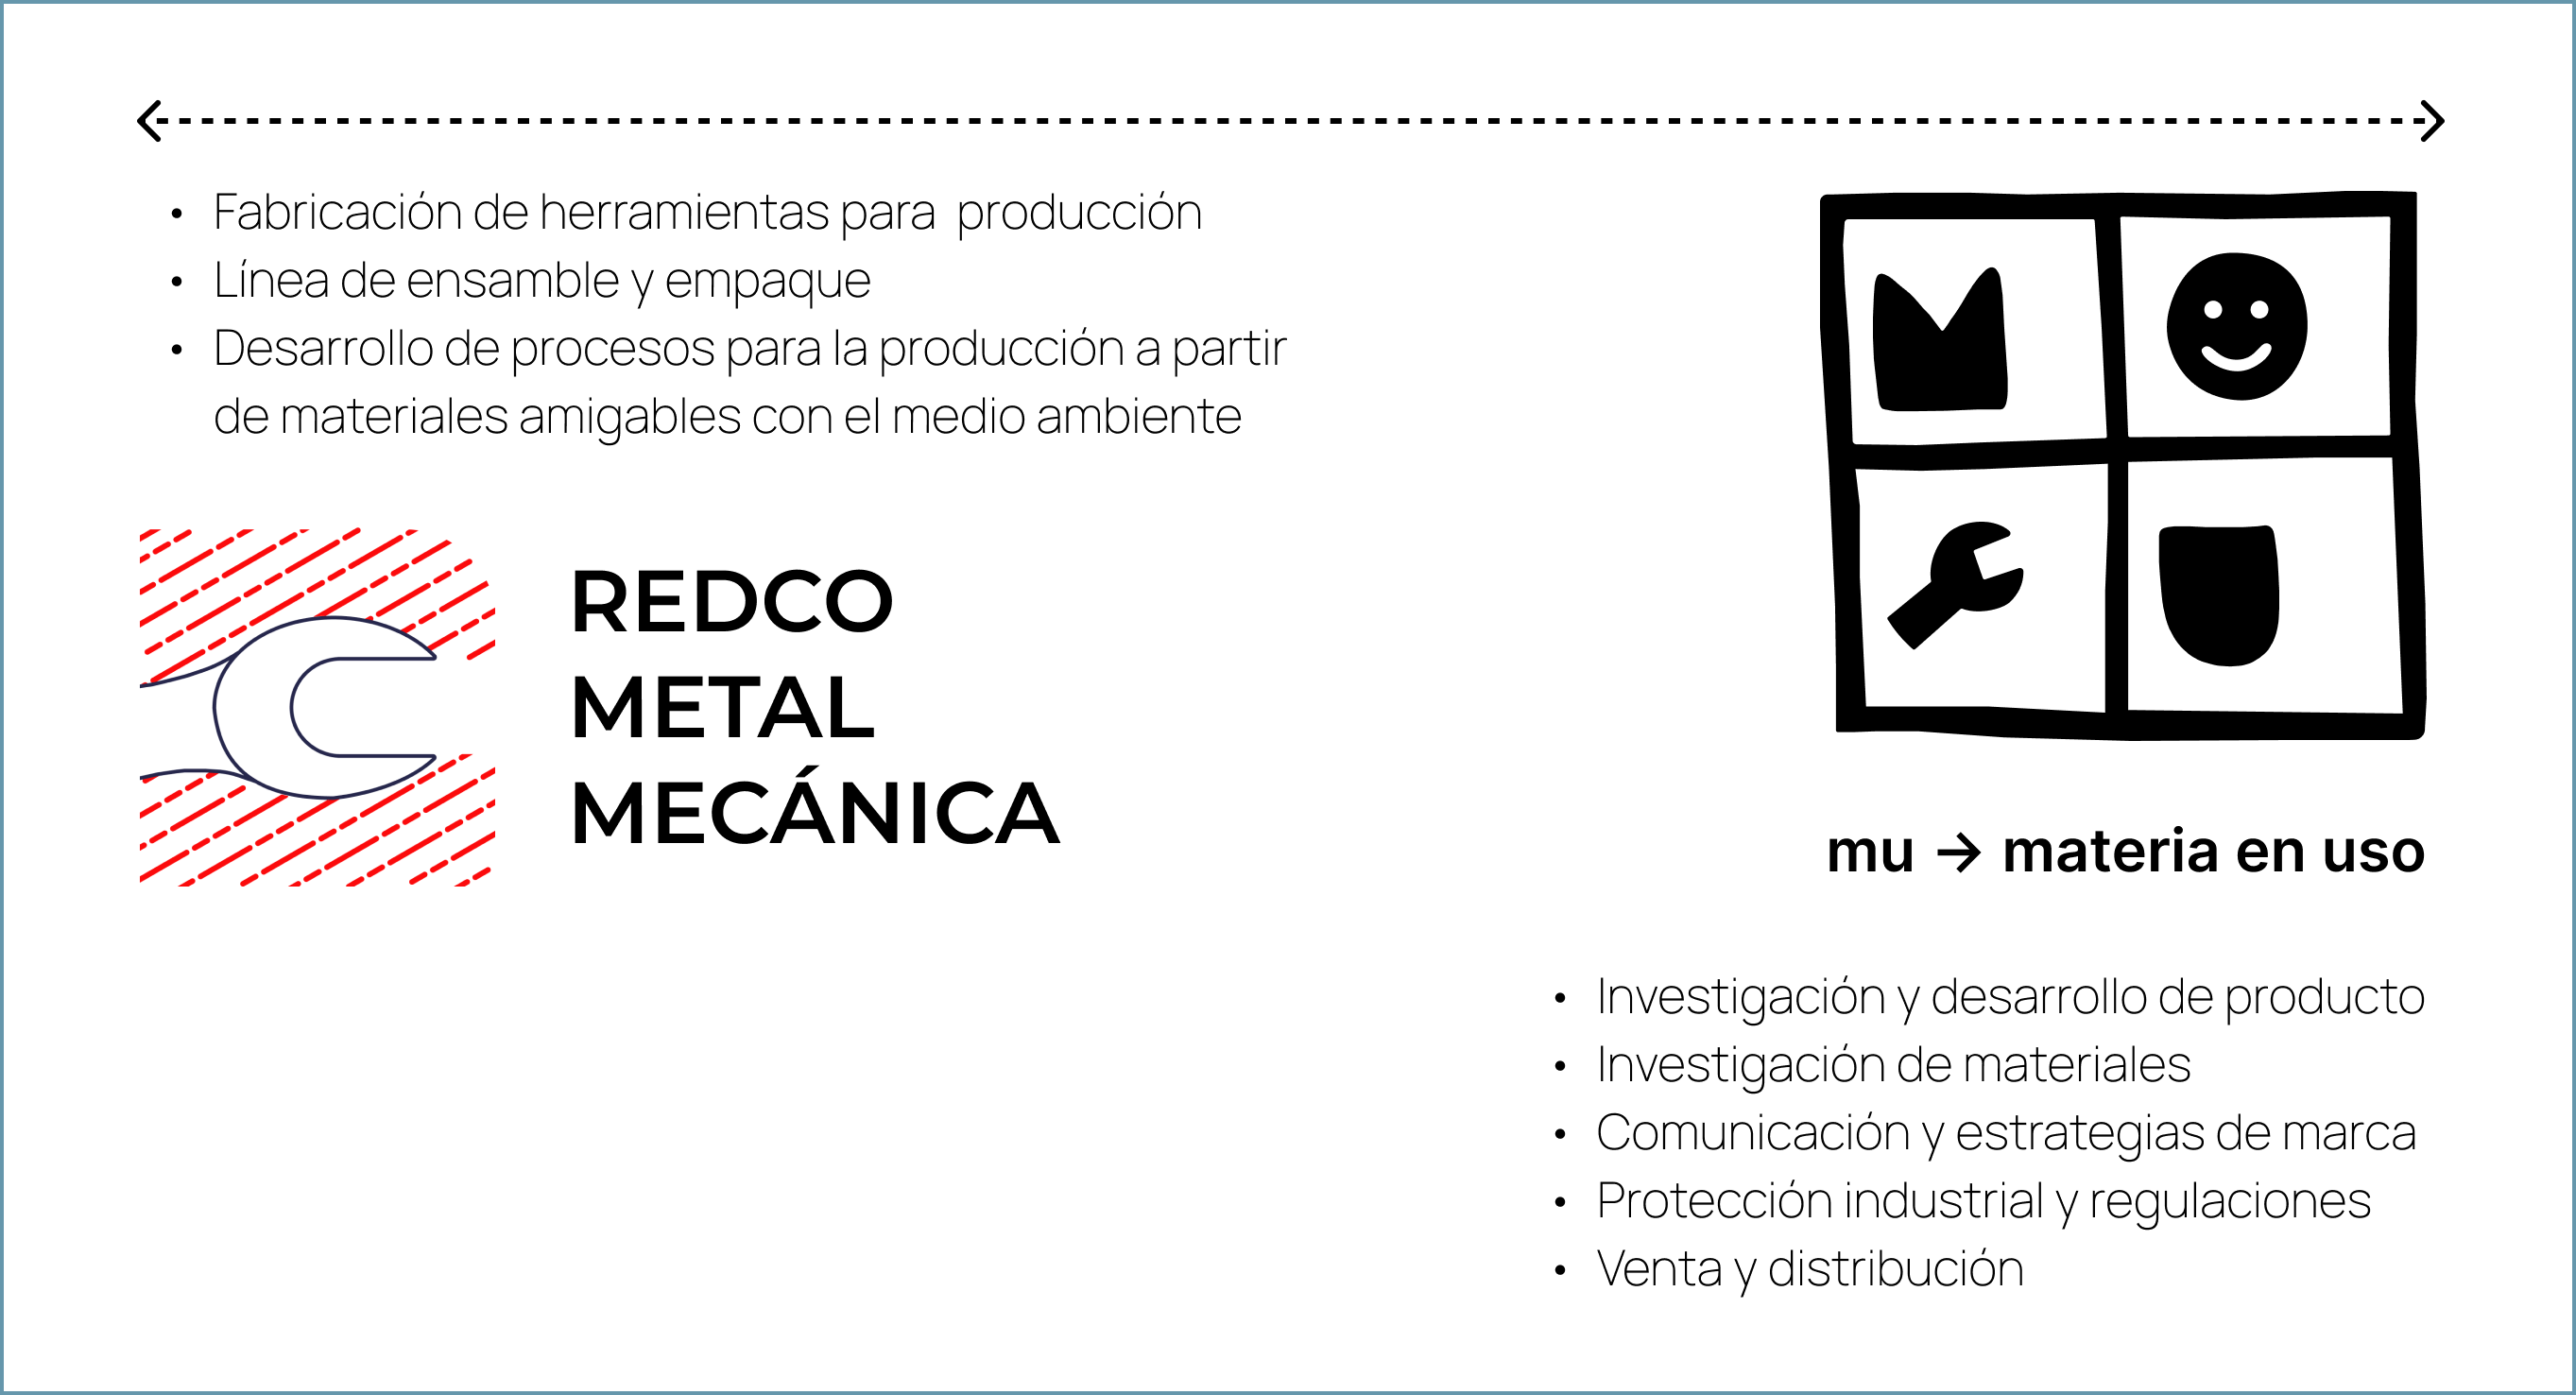 Redco Metal Mecánica